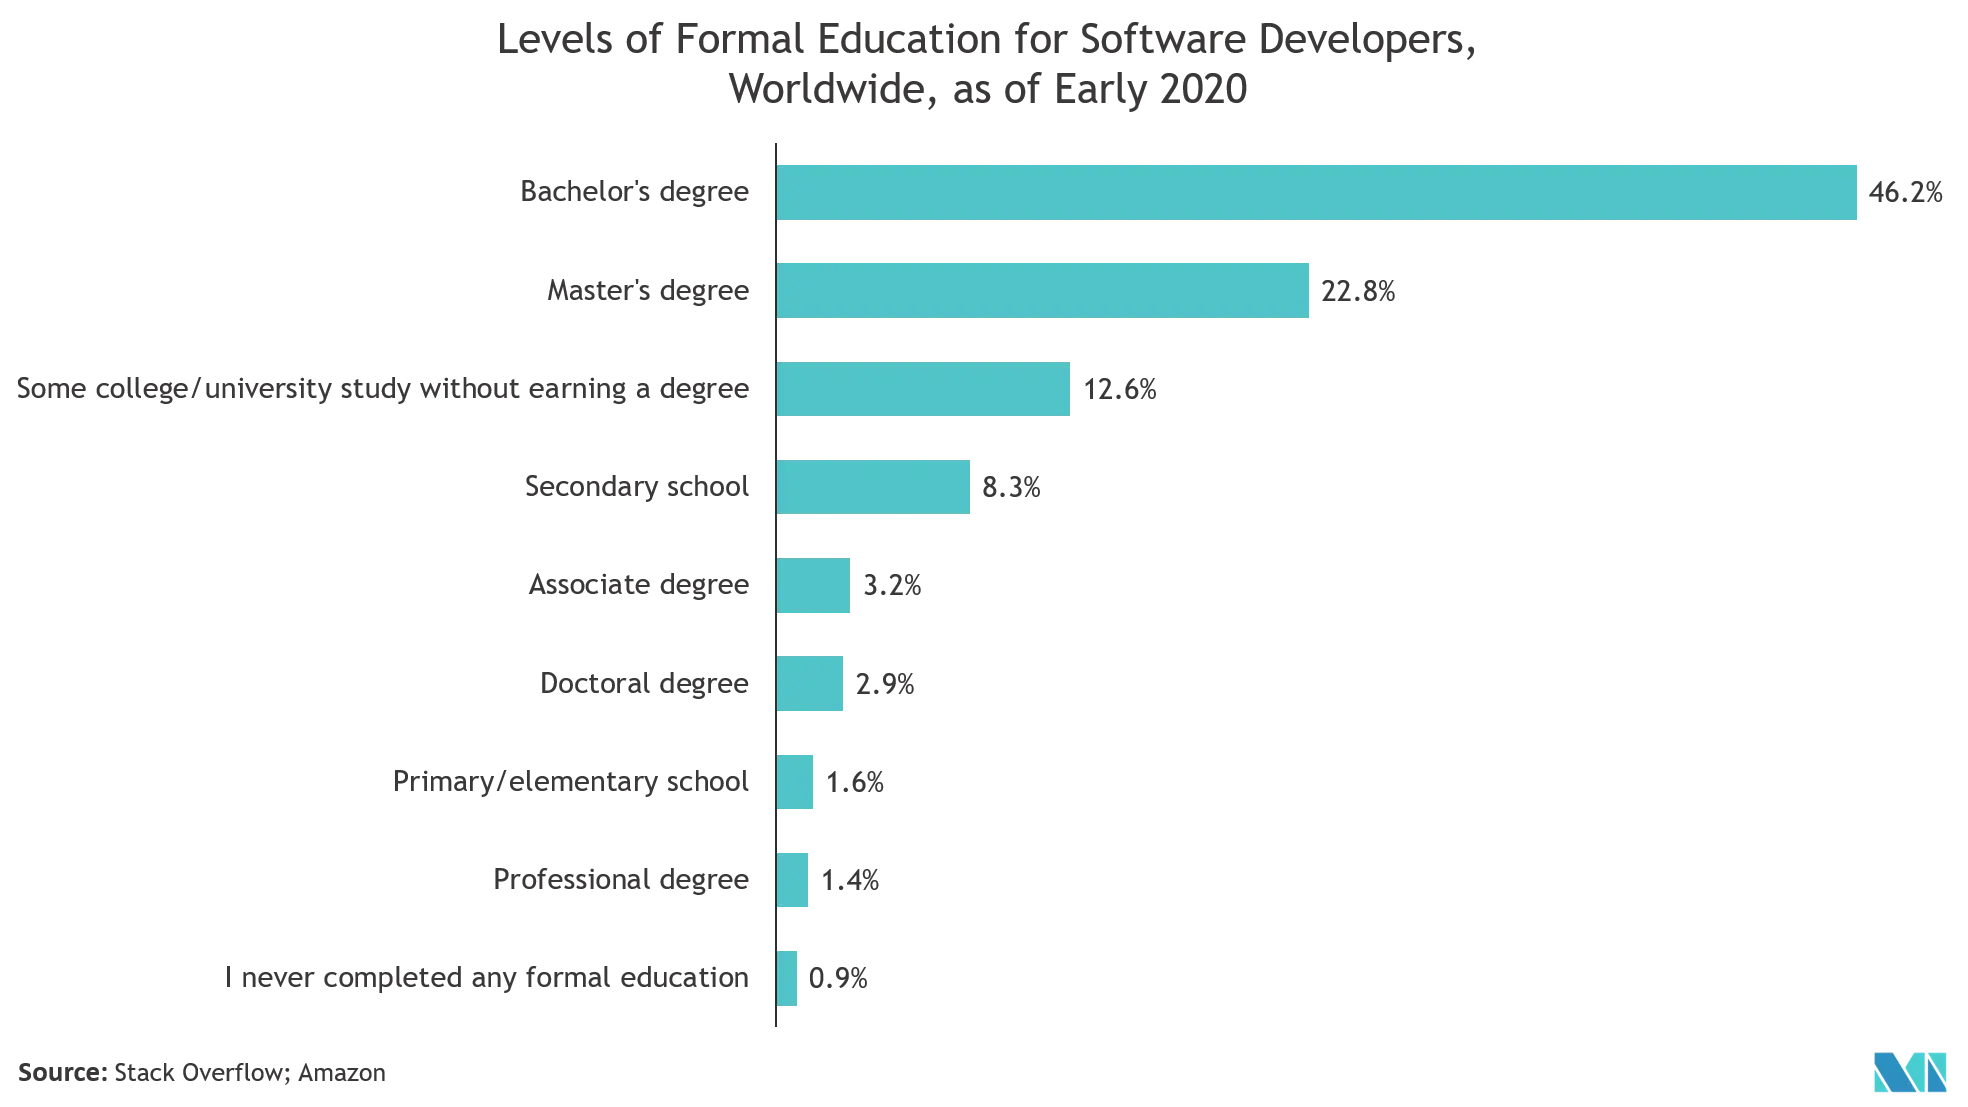 Higher Education Learning Systems Market Trends